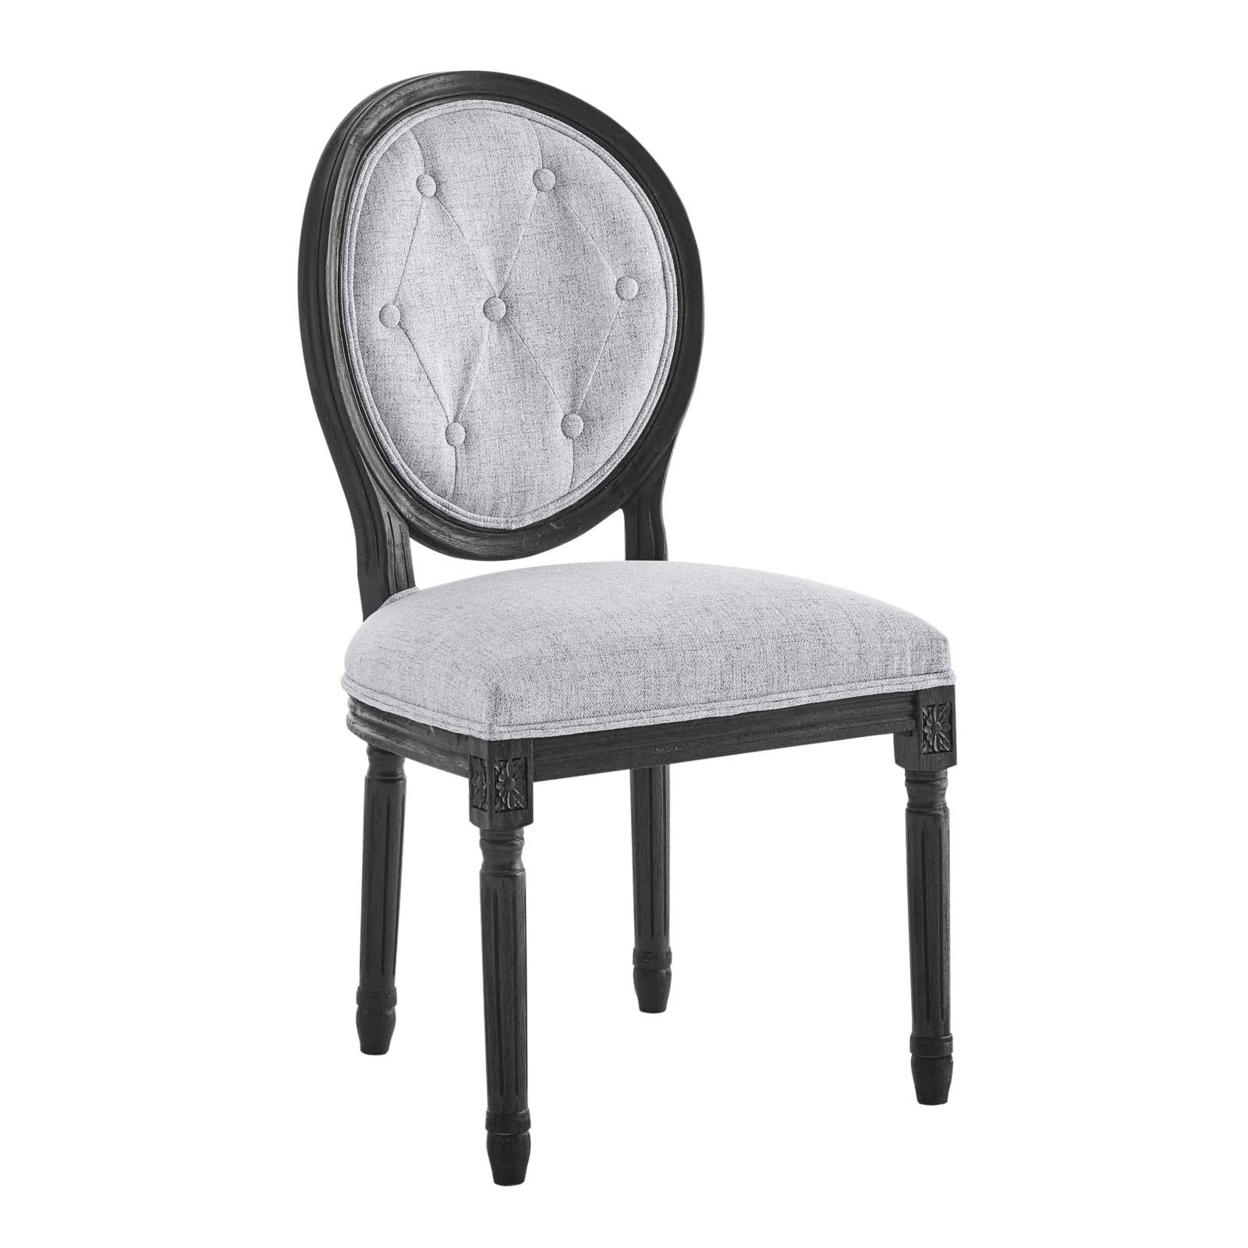 Arise Vintage French Upholstered Fabric Dining Side Chair, Black Light Gray